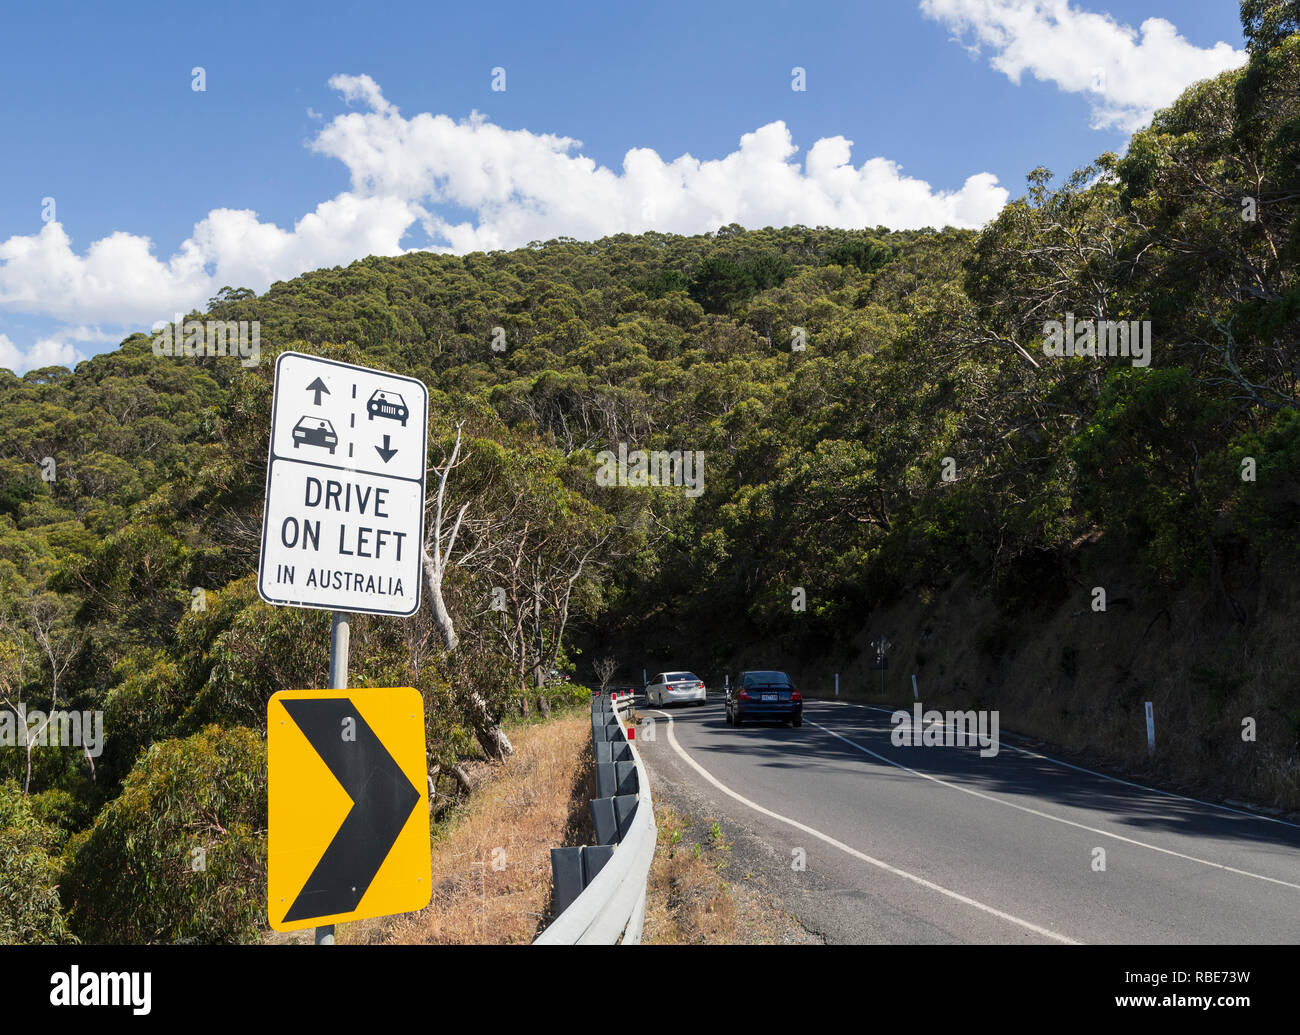 Warning to foreign tourists that in Australia they must drive on the left.  Photographed on the Great Ocean Road, Victoria, Australia. Stock Photo